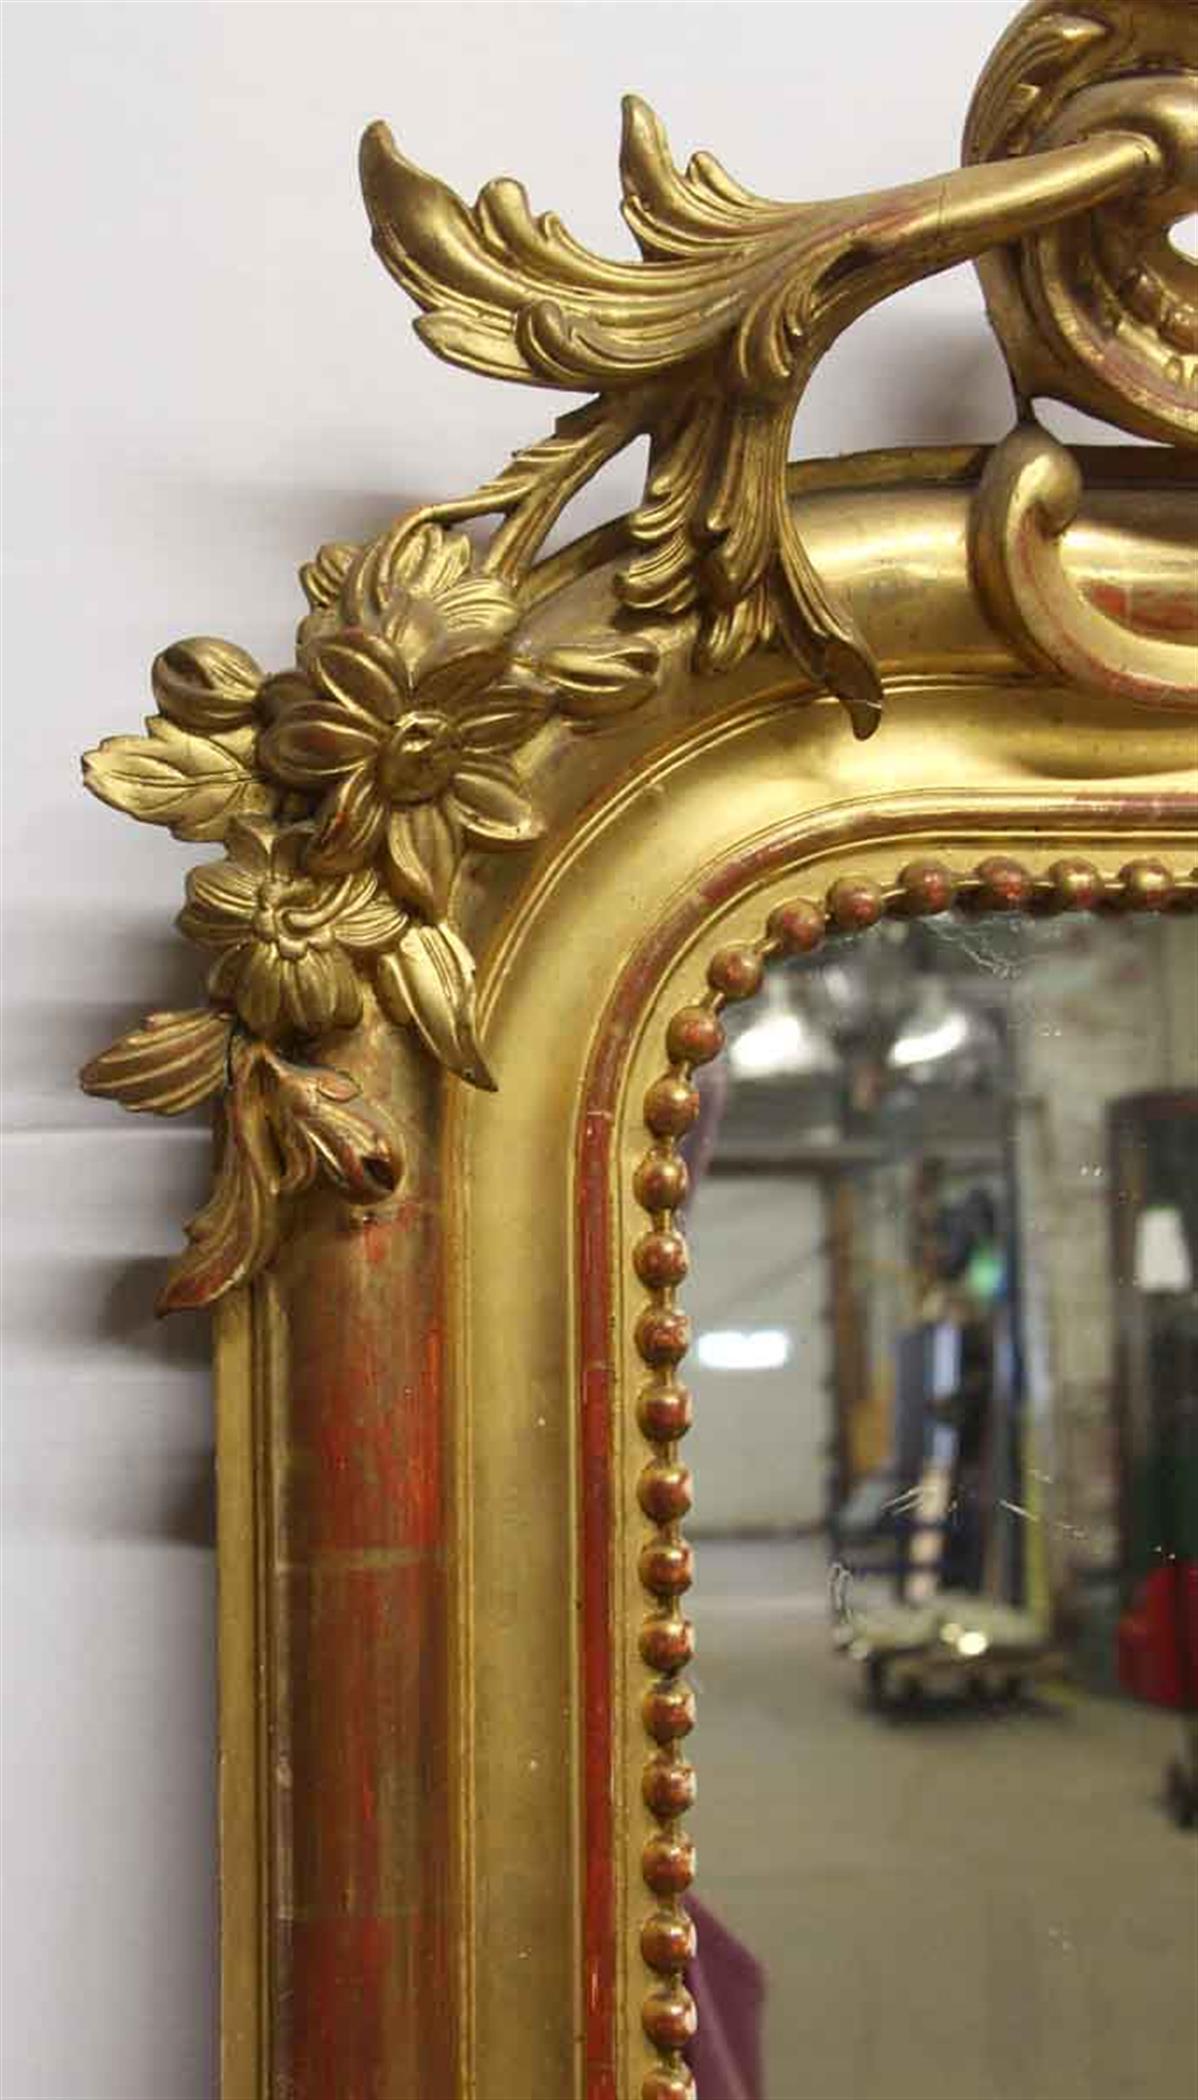 Early 20th Century 1920s French Hand Carved and Gesso Gilded Over Mantel Mirror with Floral Details